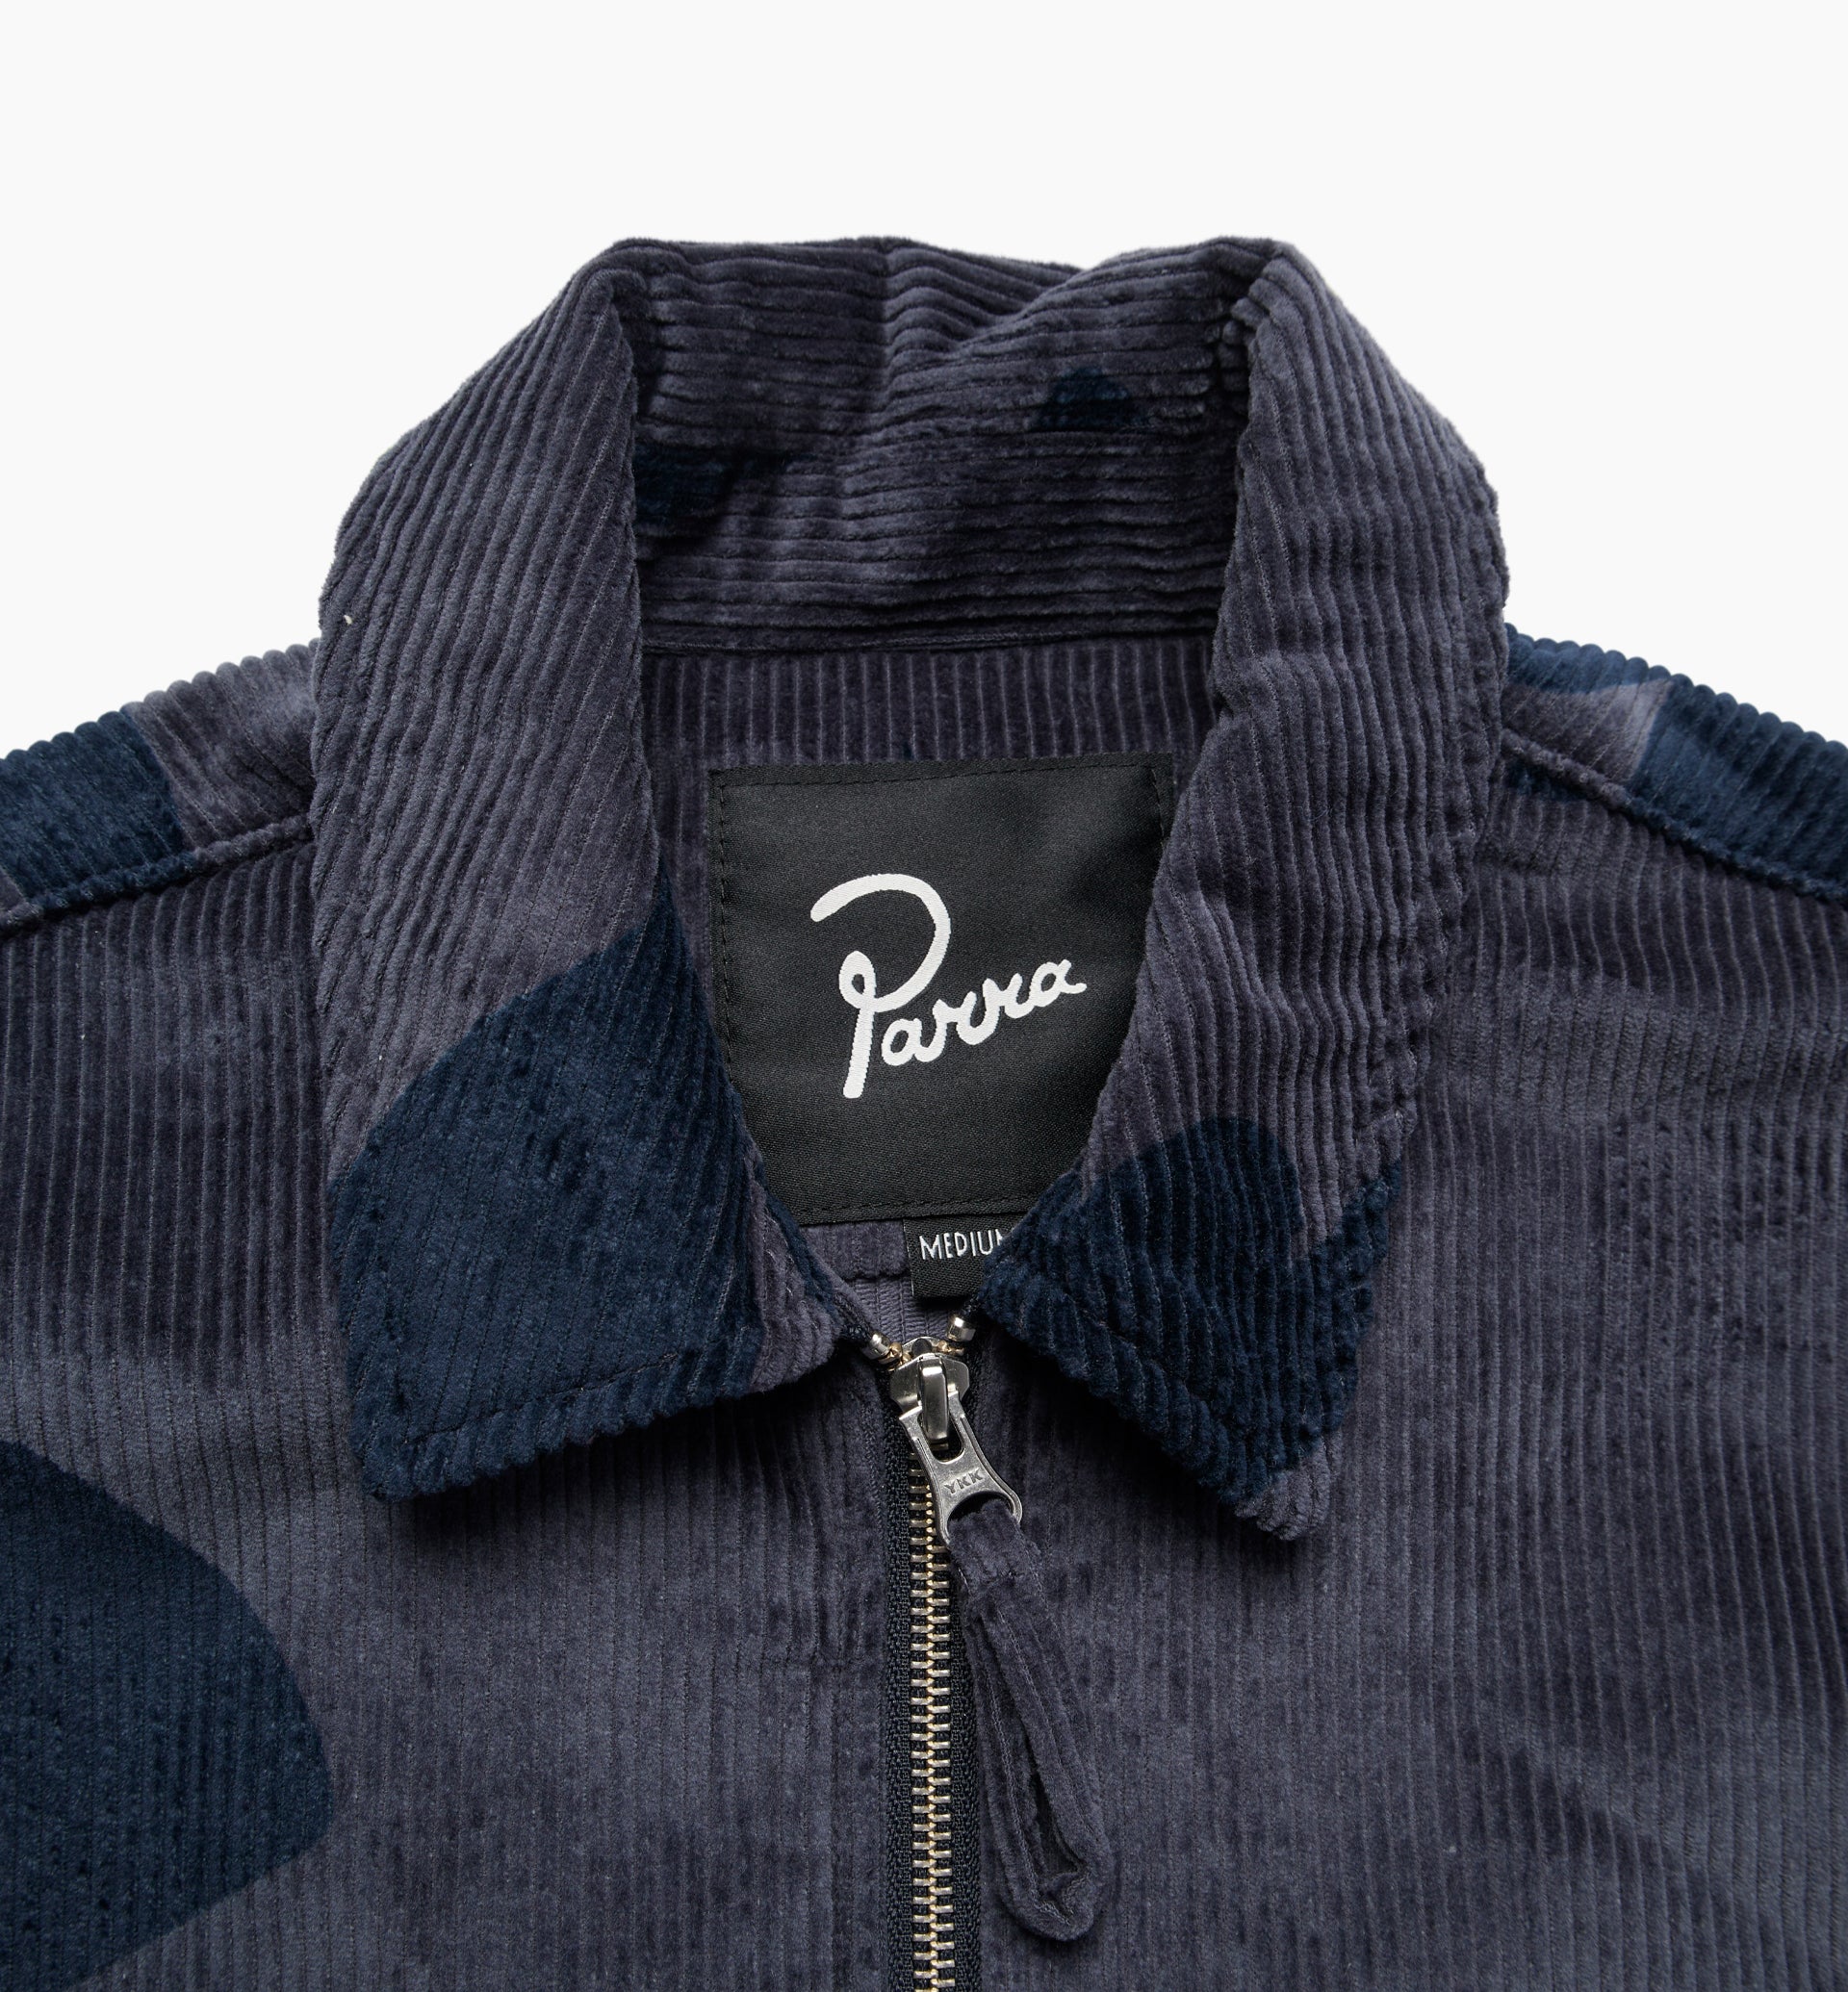 Parra - clipped wings shirt jacket